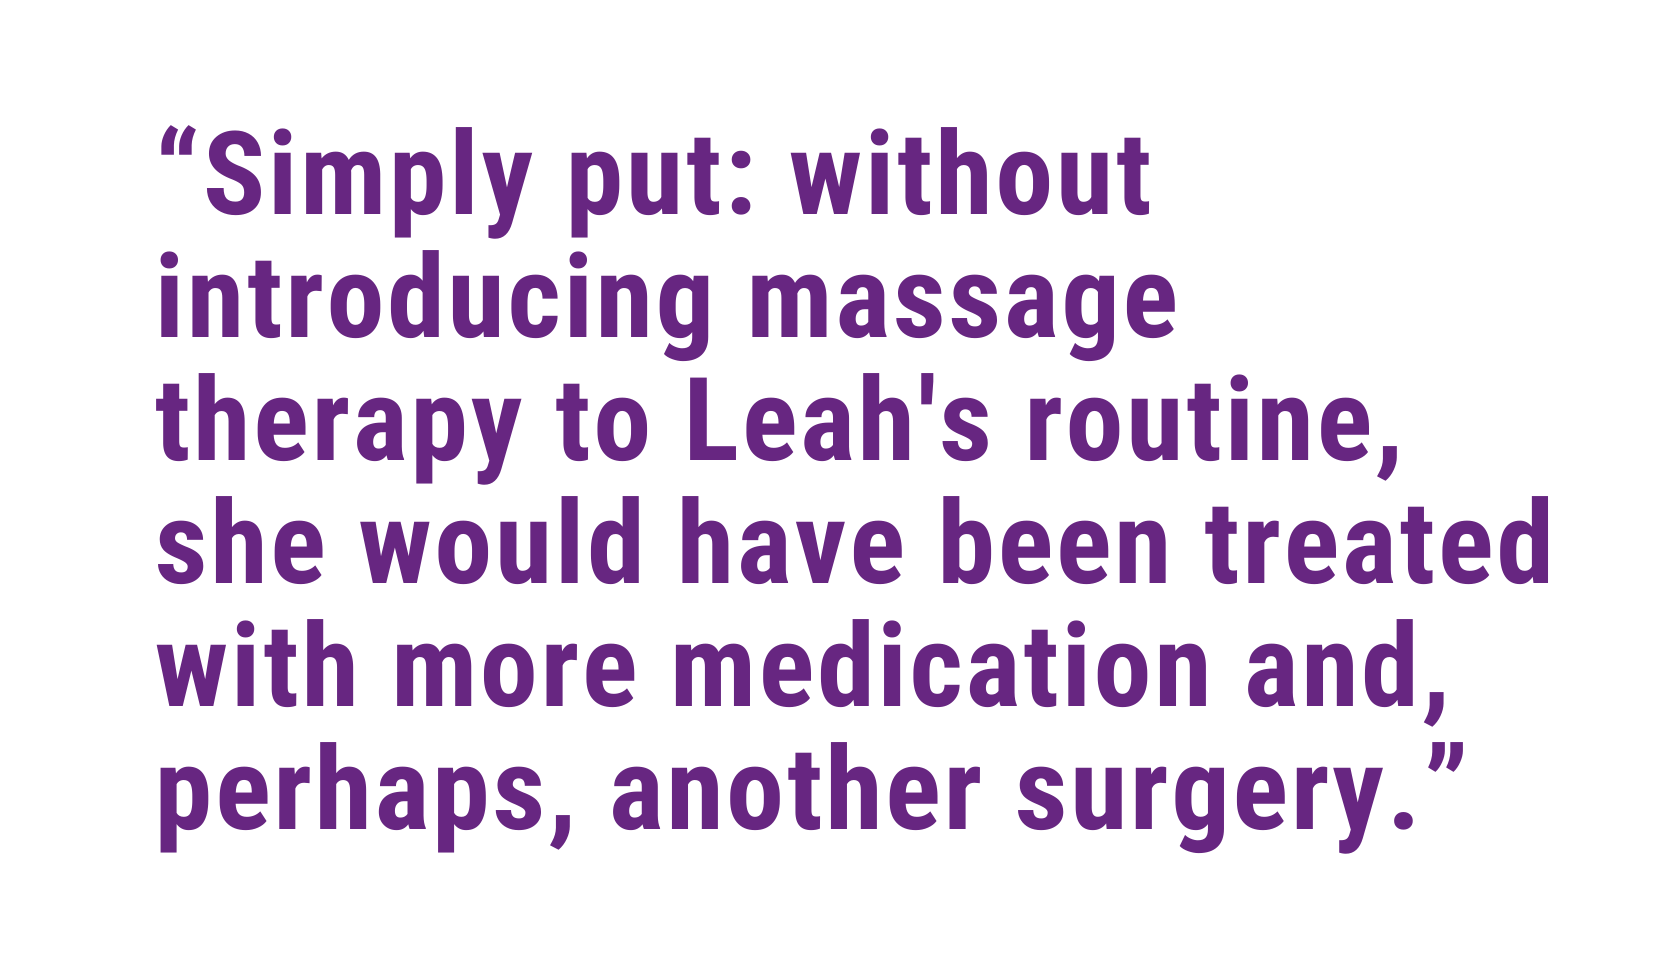 Simply put: without introducing massage therapy to Leah's routine, she would have been treated with more medication and, perhaps, another surgery.